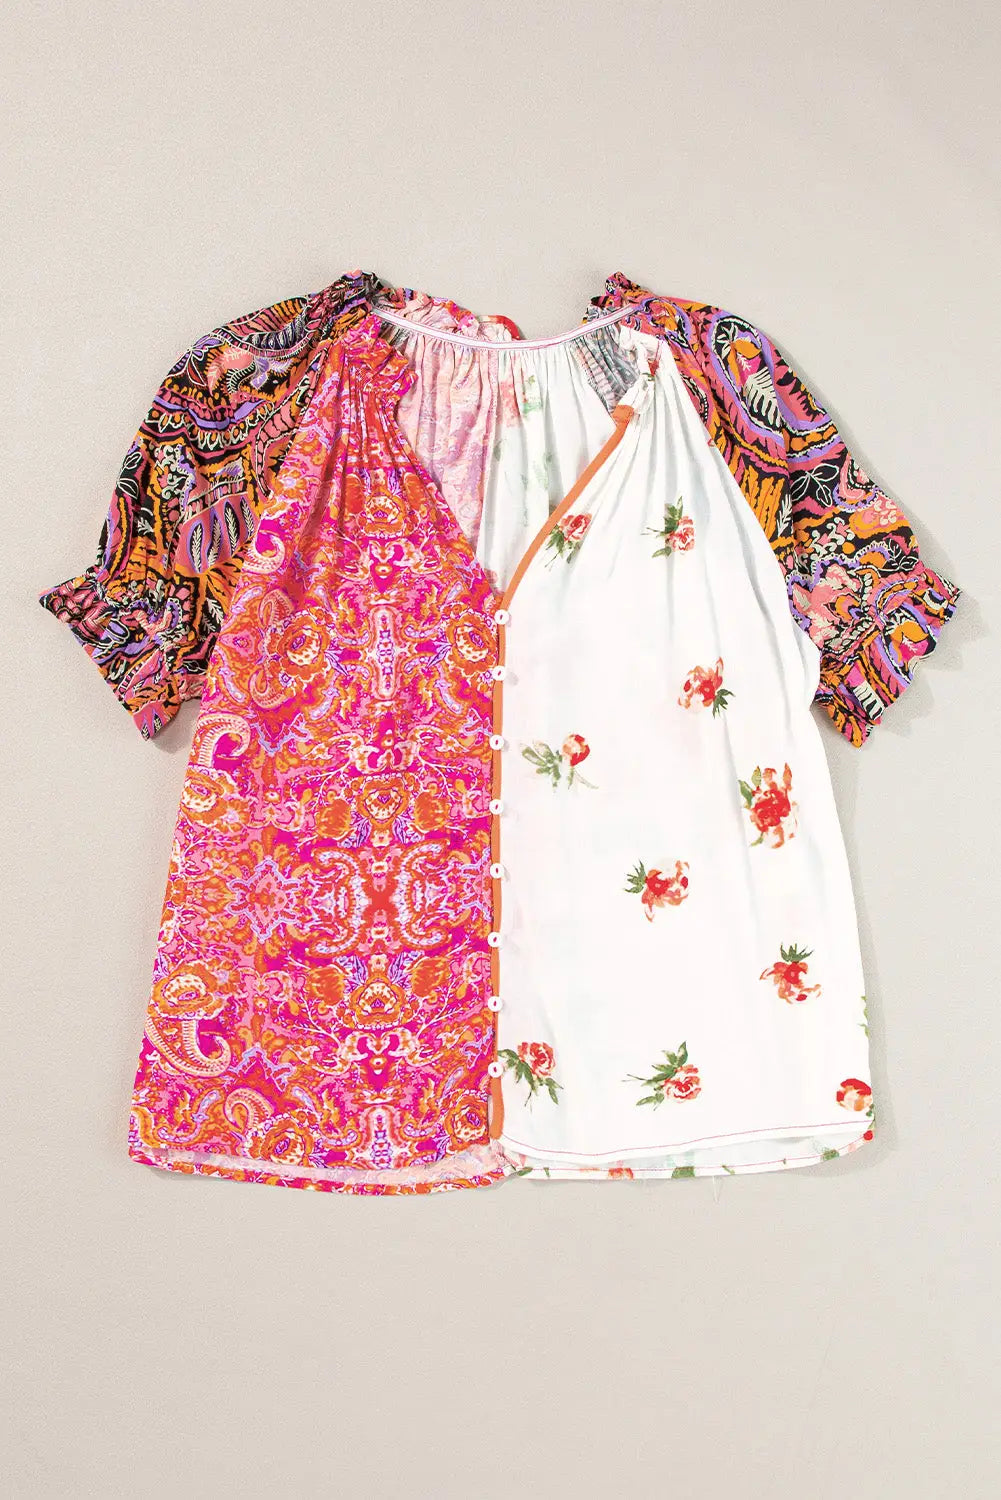 Boho floral patchwork buttoned blouse - tops/blouses & shirts